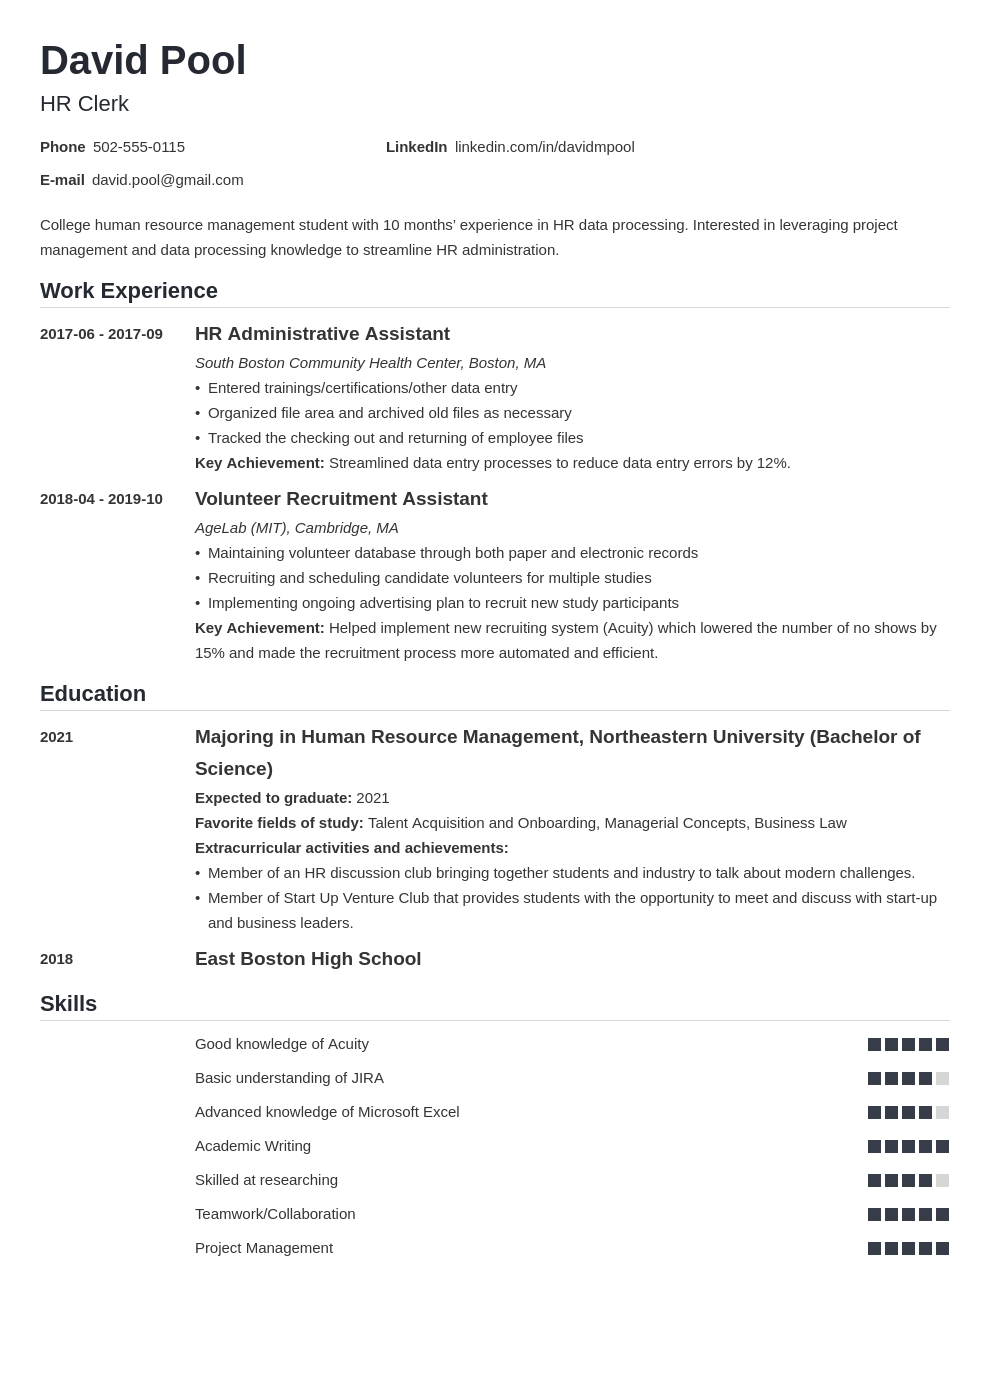 Resume Template For A College Student from cdn-images.zety.com